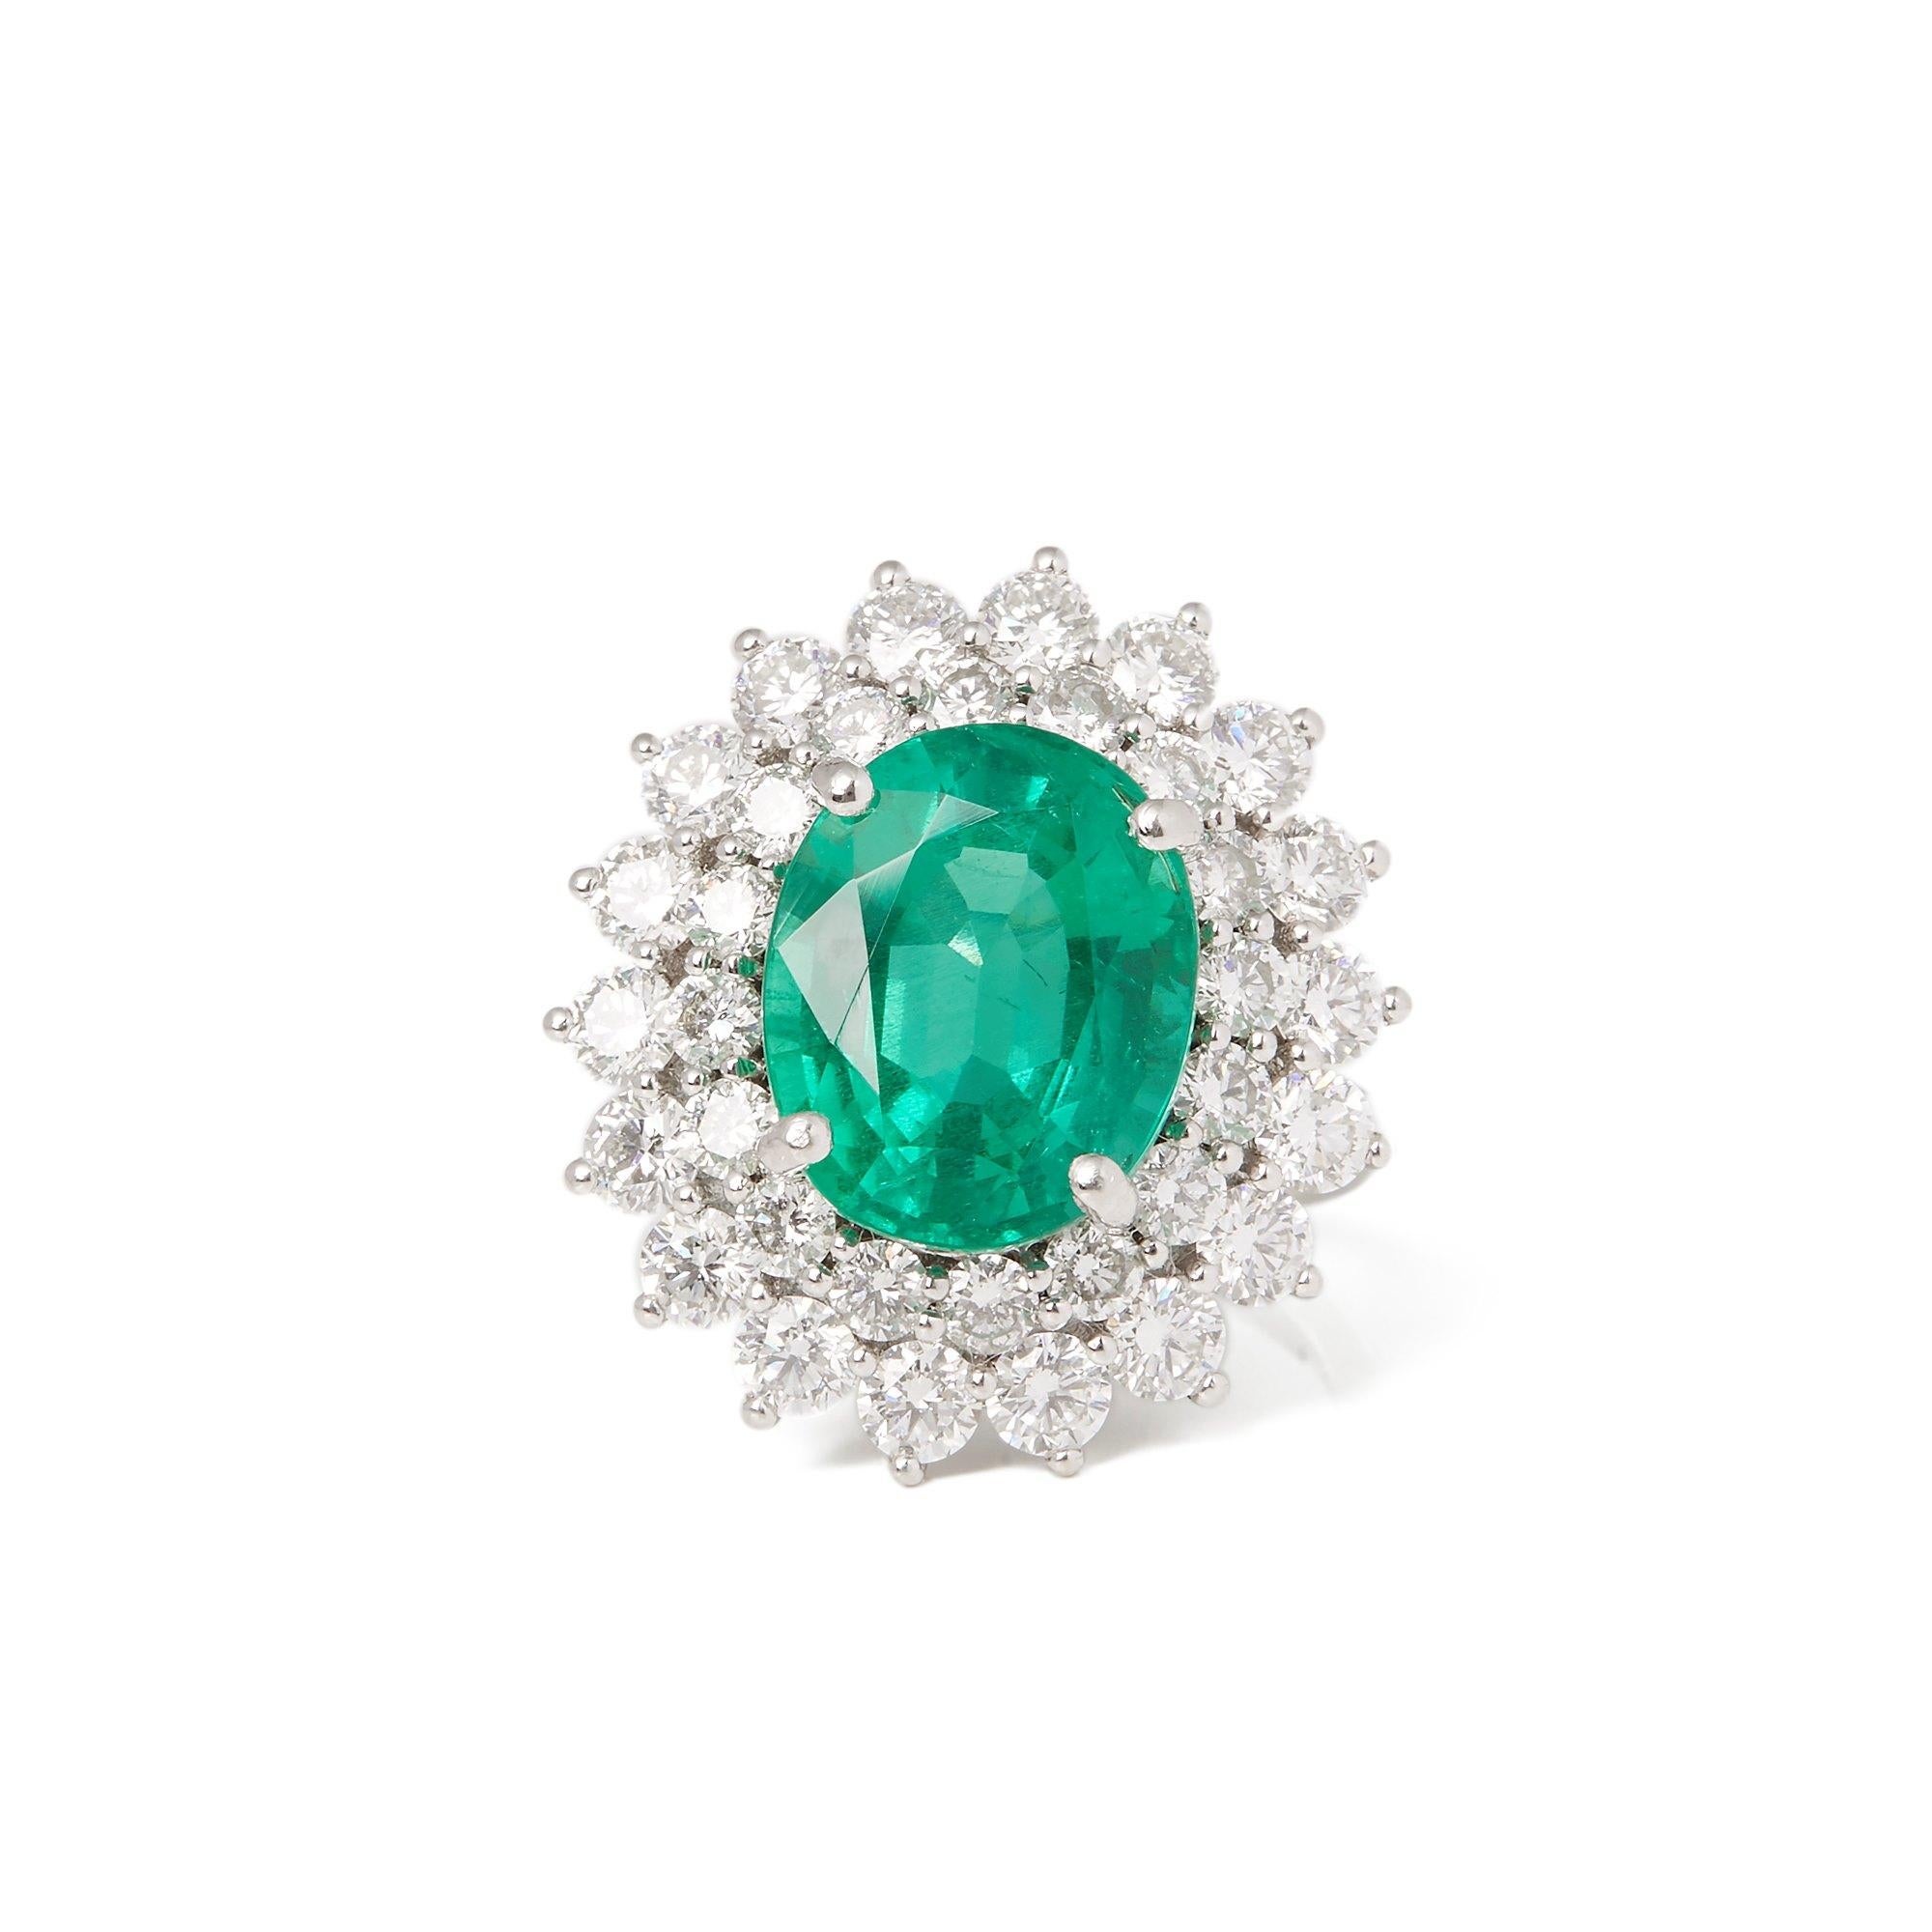 This ring designed by David Jerome is from his private collection and features one oval cut Emerald totalling 6.42cts sourced in Columbia. Set with round brilliant cut Diamonds totalling 3.04cts mounted in a platinum setting. Finger size UK N, EU